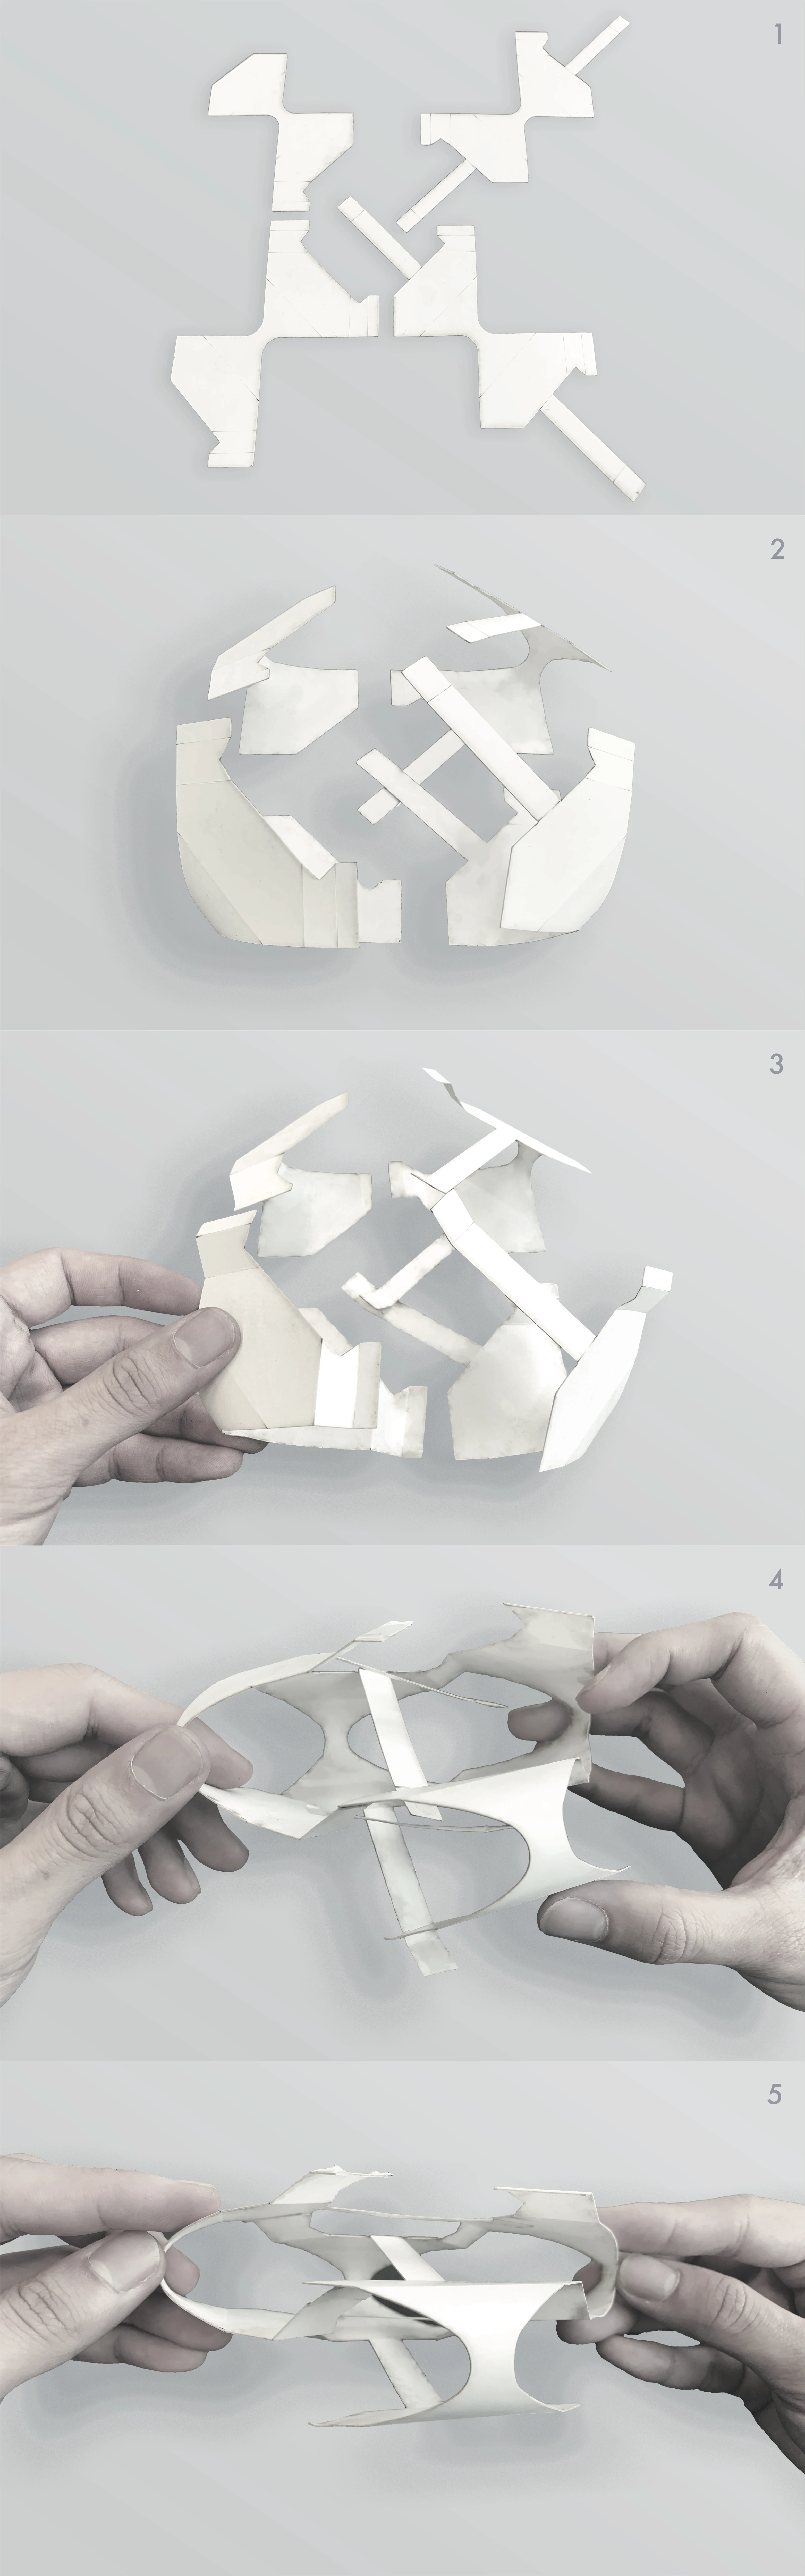 Skyhive architecture competition winners 2019- 03-folding-sequence